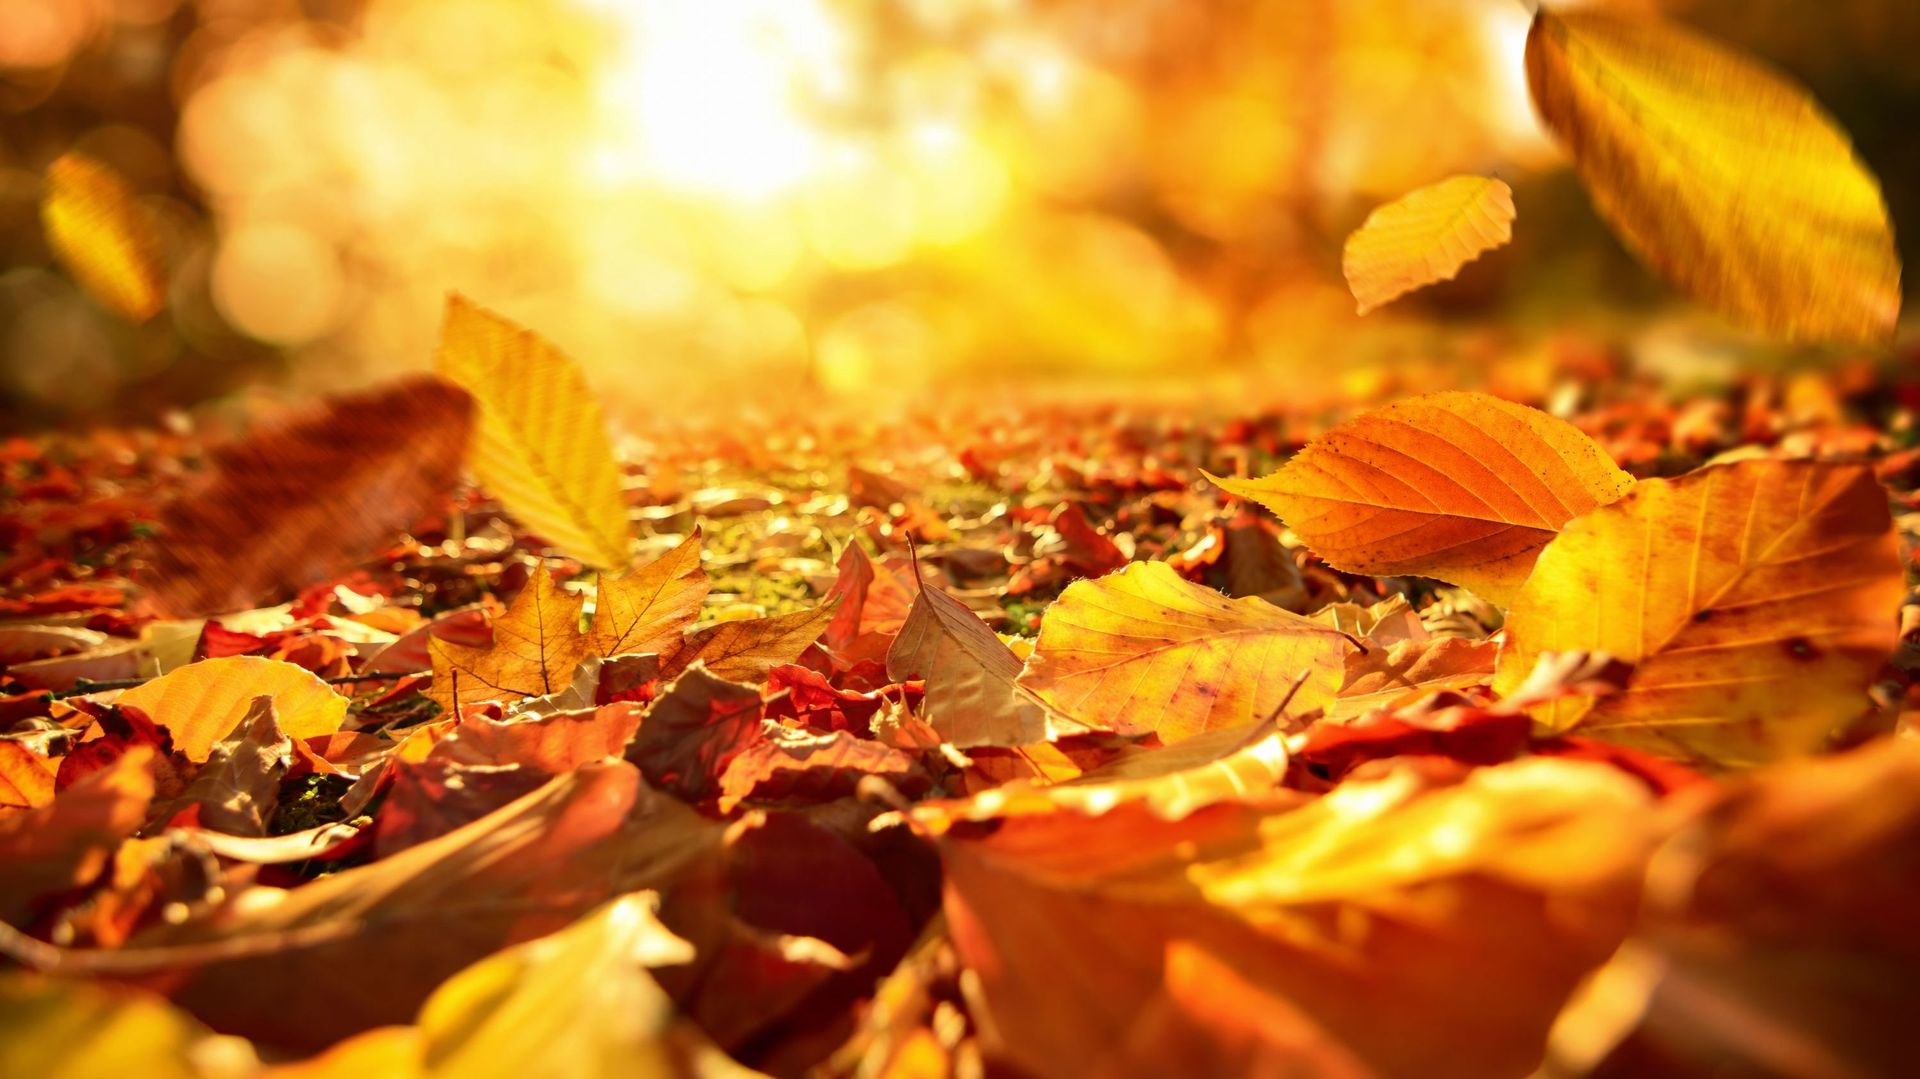 Falling Autumn leaves in lively sunlight